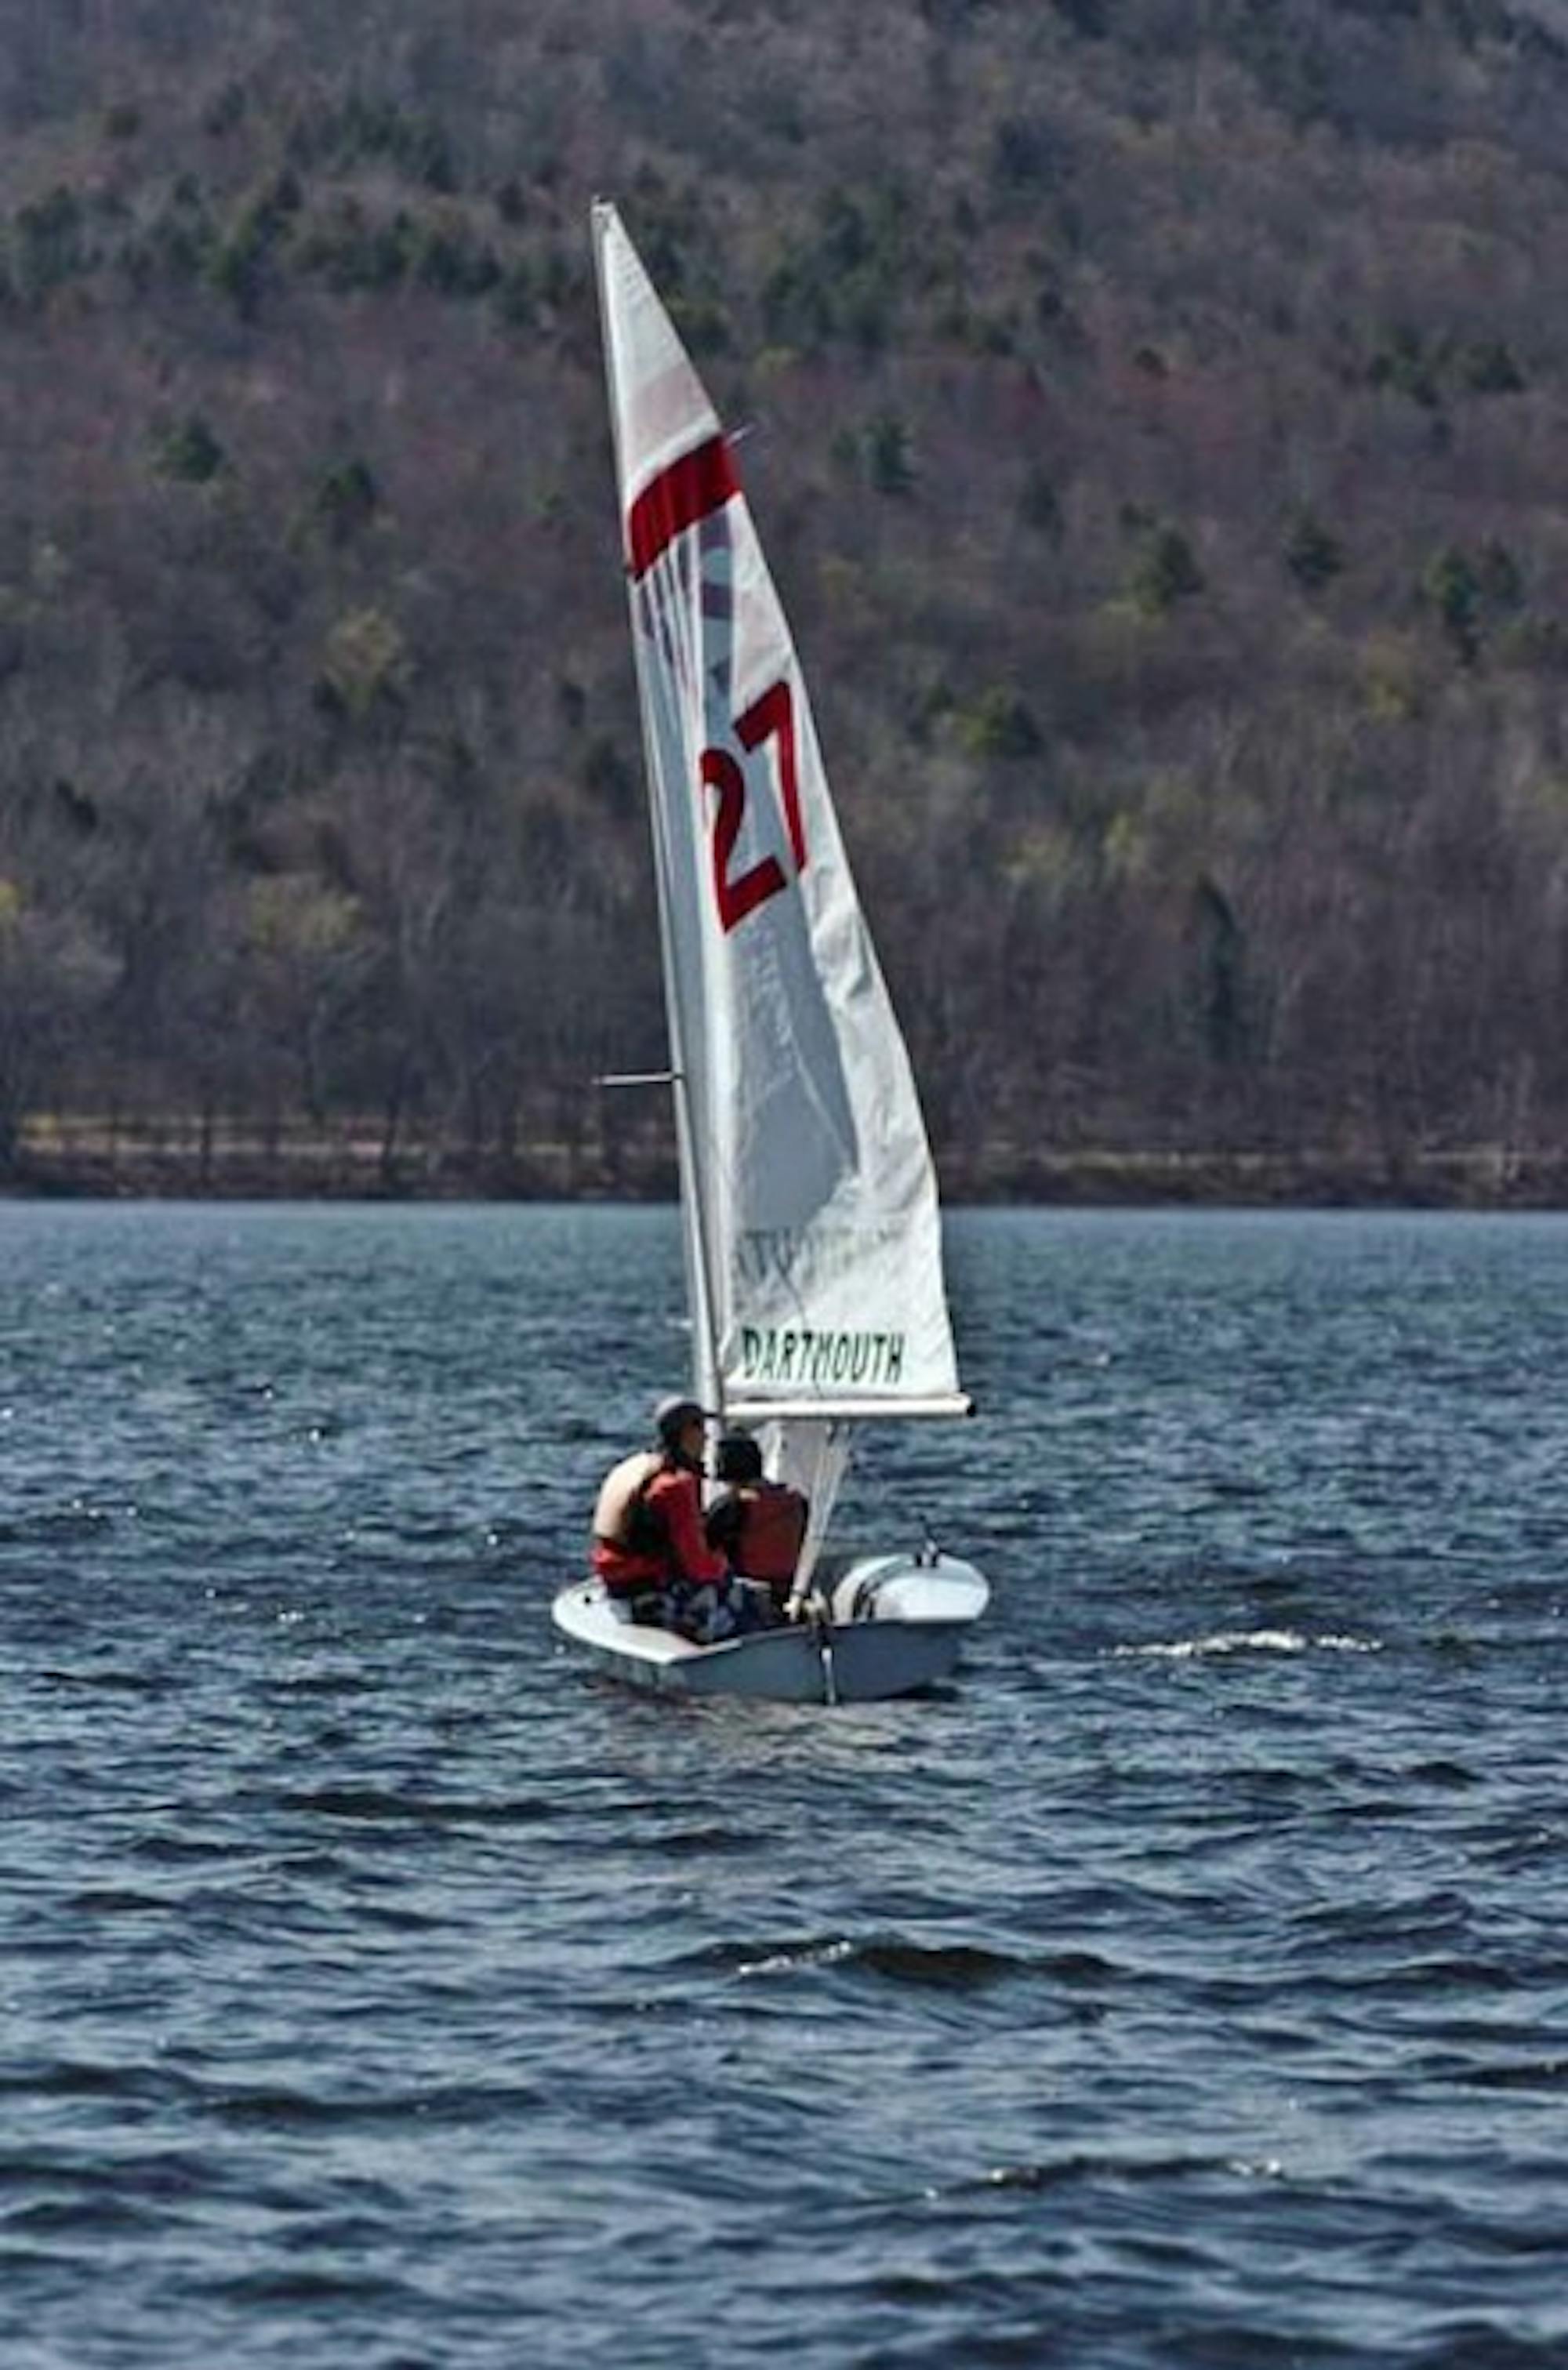 The Dartmouth sailing team will host the Captain Hurst Bowl on Mascoma Lake this weekend.